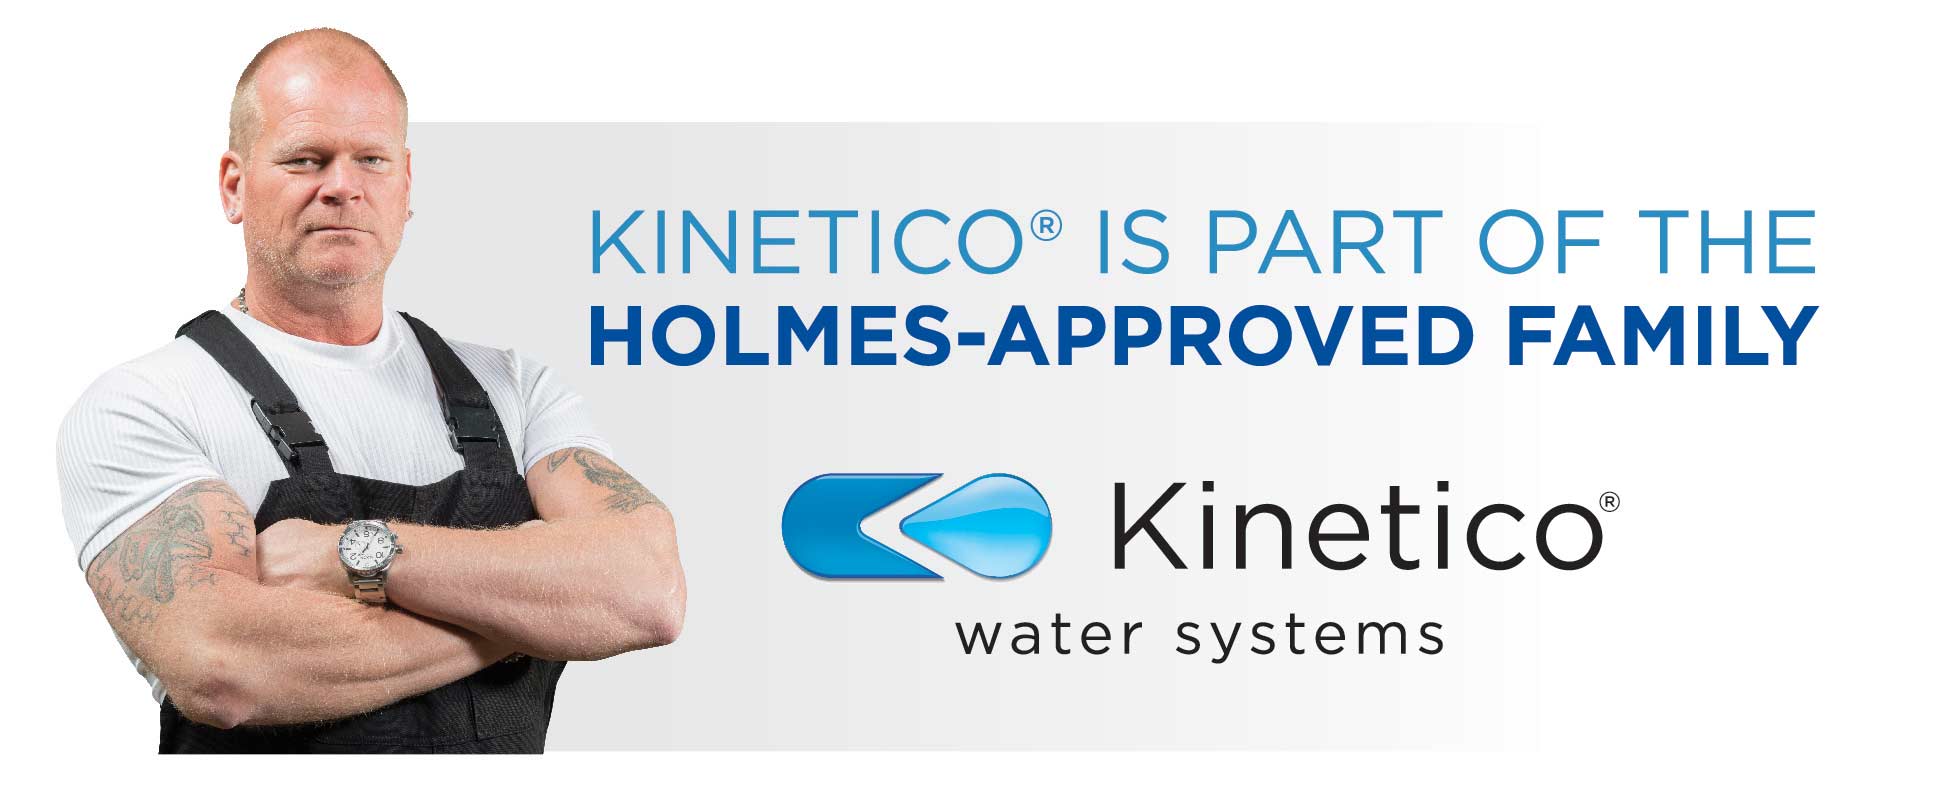 Kinetico is part of the Mike Holmes approved family